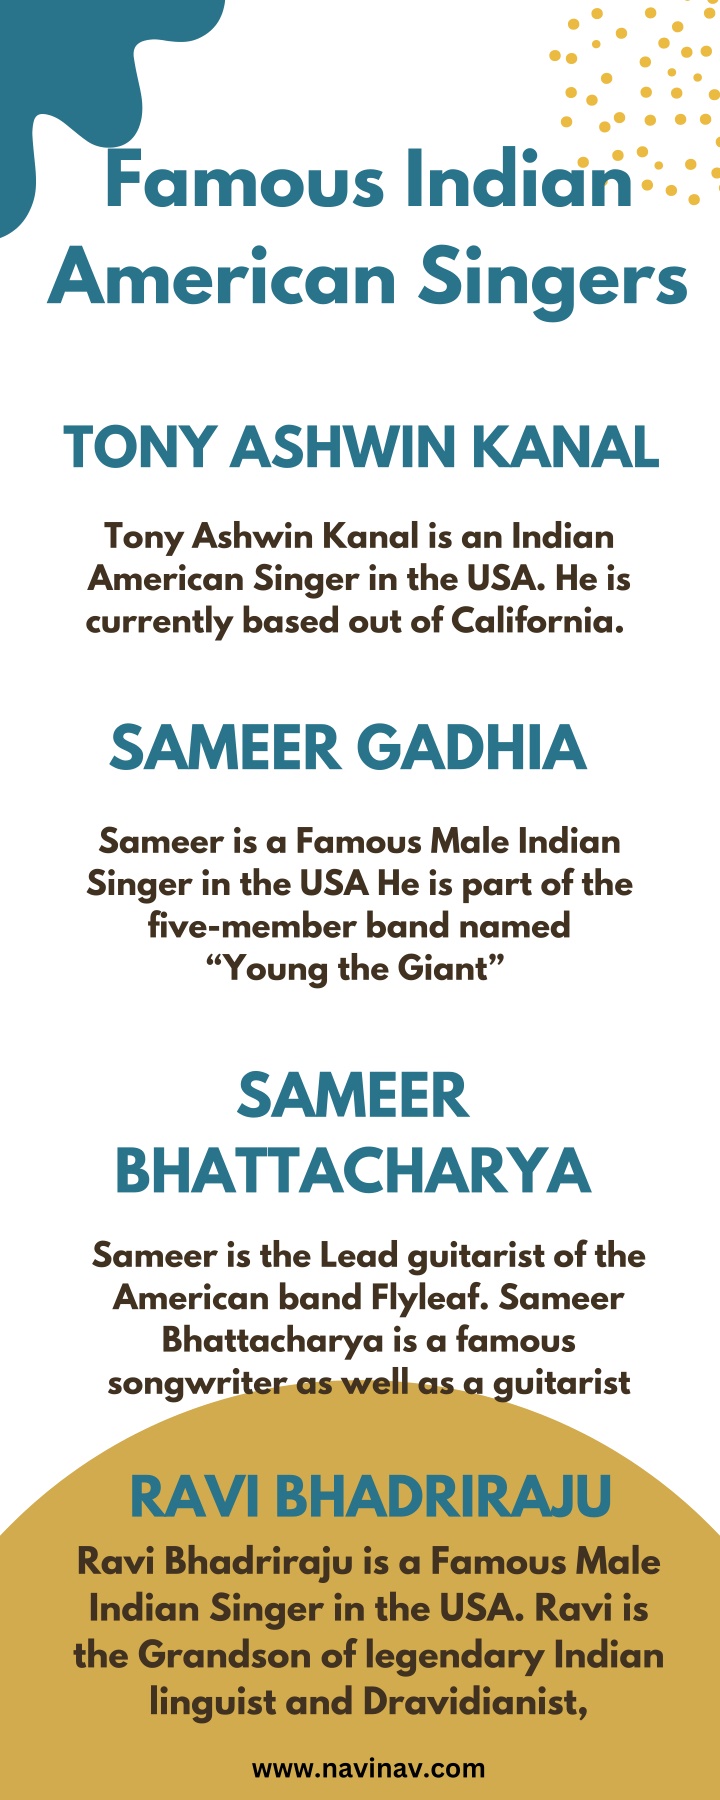 famous indian american singers